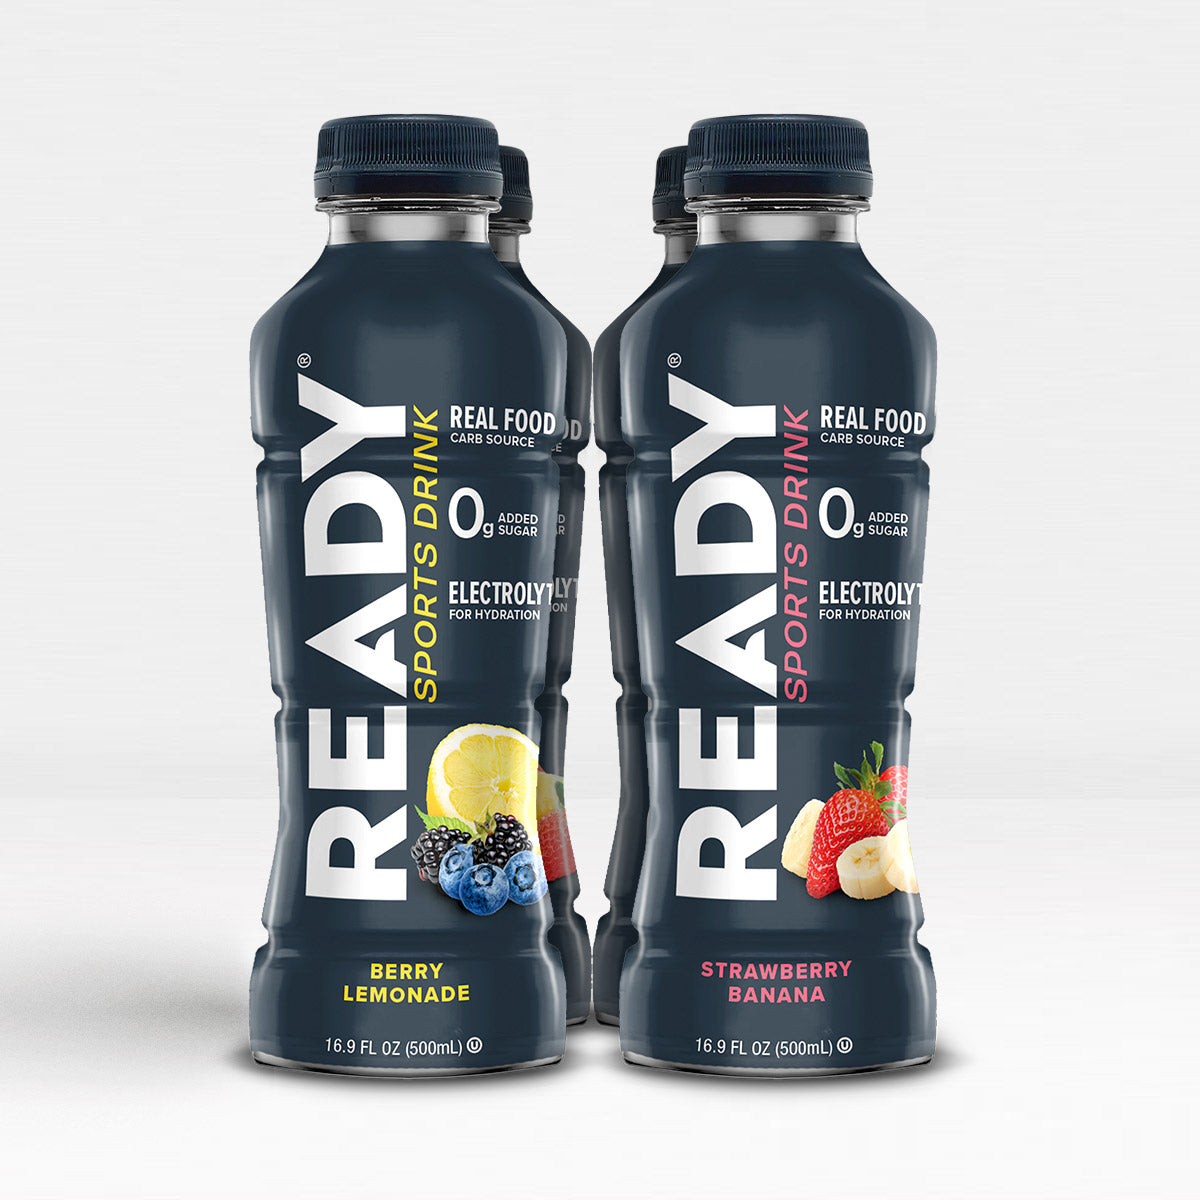 4 count of Ready Sports Drink in 16.9 fl oz bottles